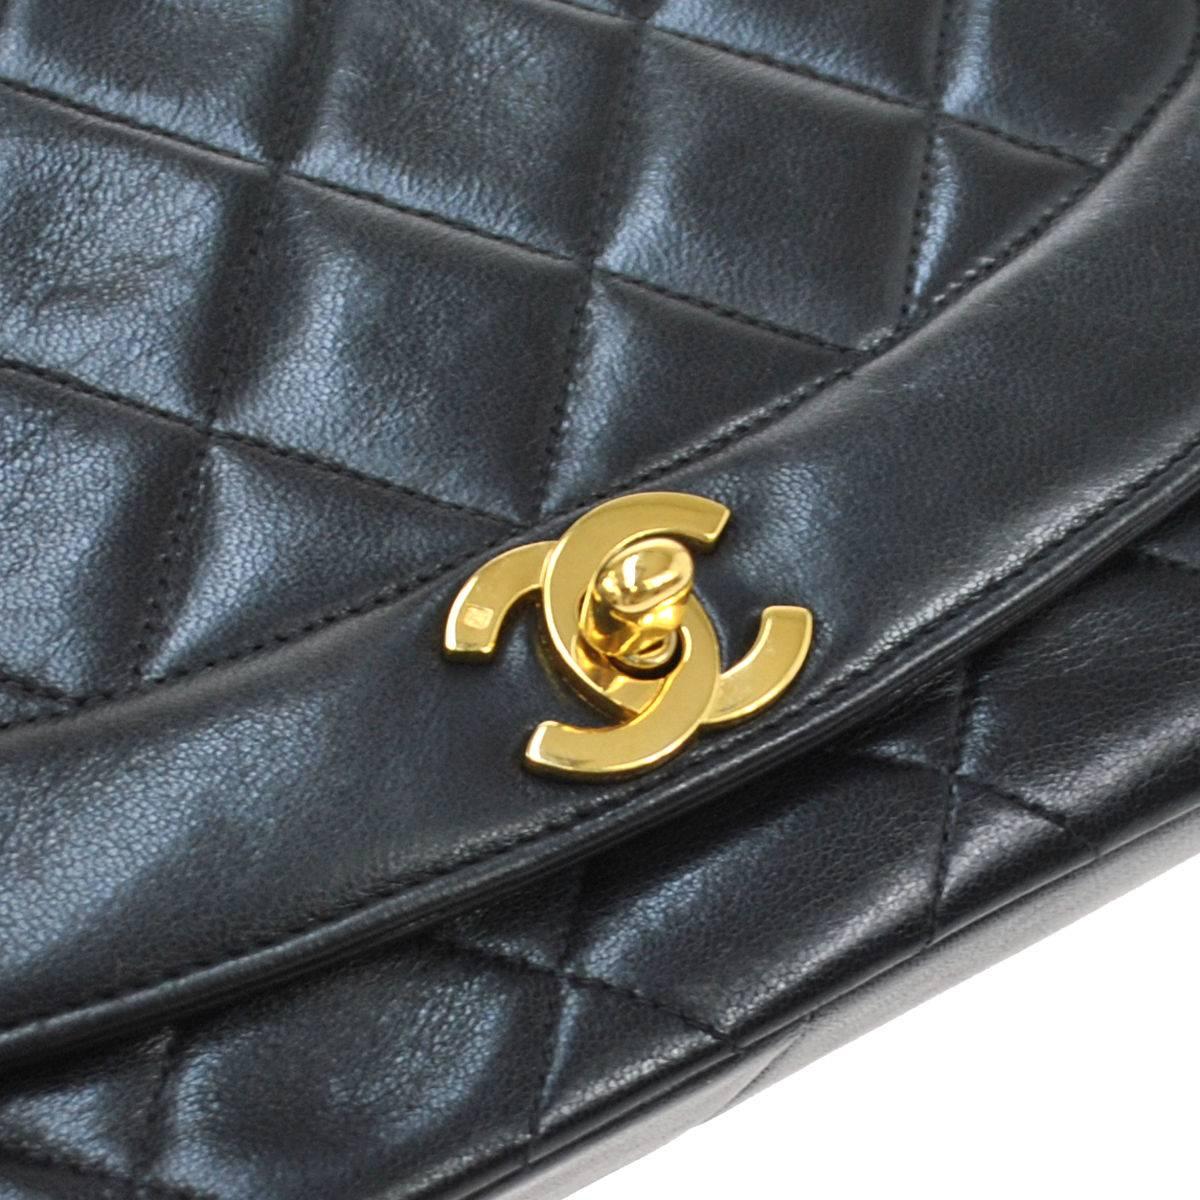 CURATOR'S NOTES

Chanel Black Lambskin Evening Flap Shoulder Bag  

Lambskin leather
Gold tone hardware
Turnlock closure
Leather lining
Made in France
Shoulder strap drop 21"
Measures 9.5" W x 6.5" x 3" D 

Shop Newfound Luxury